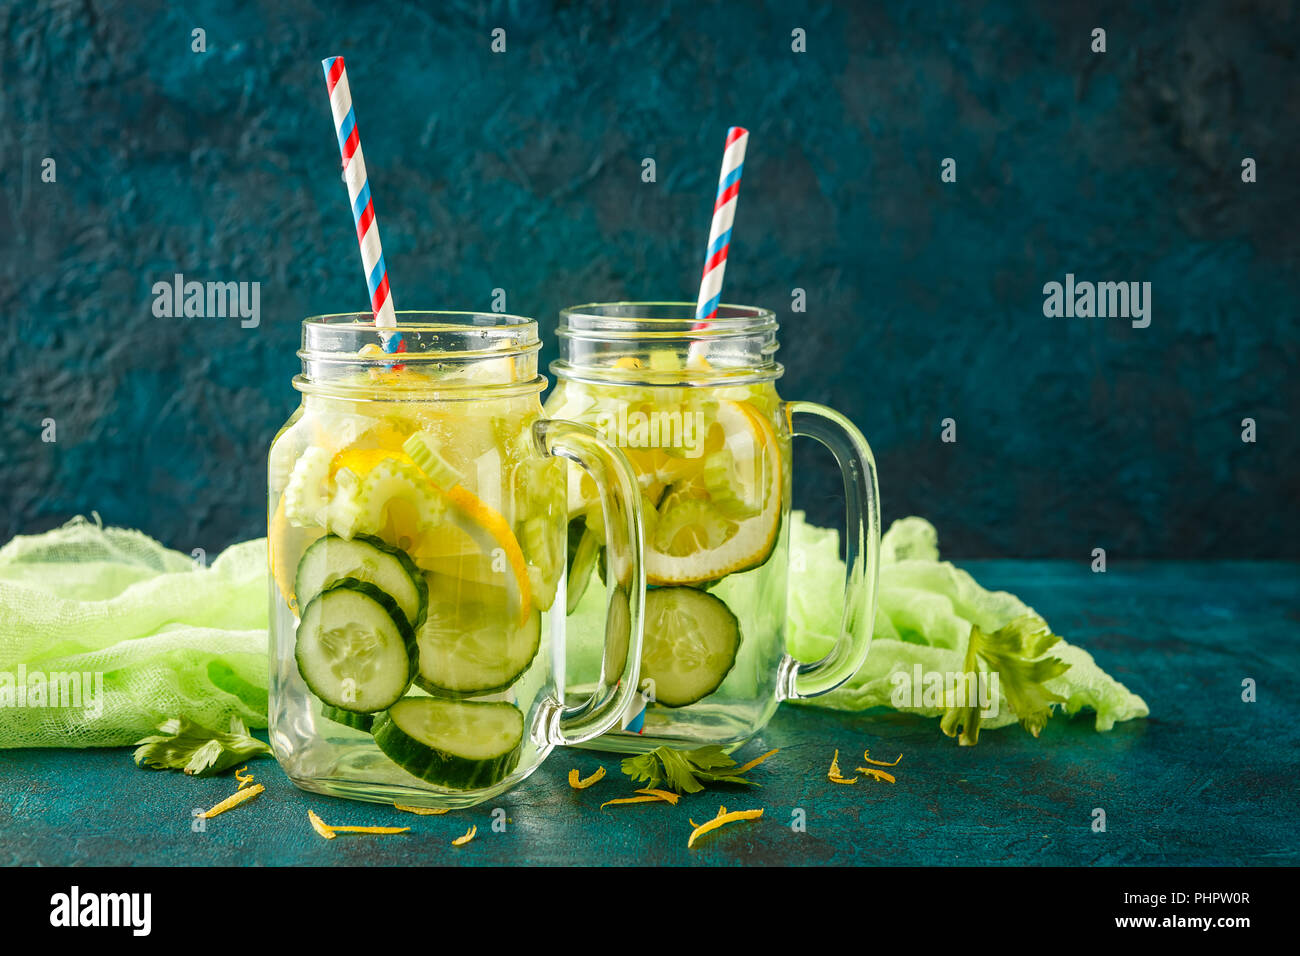 Detox water with cucumber Stock Photo